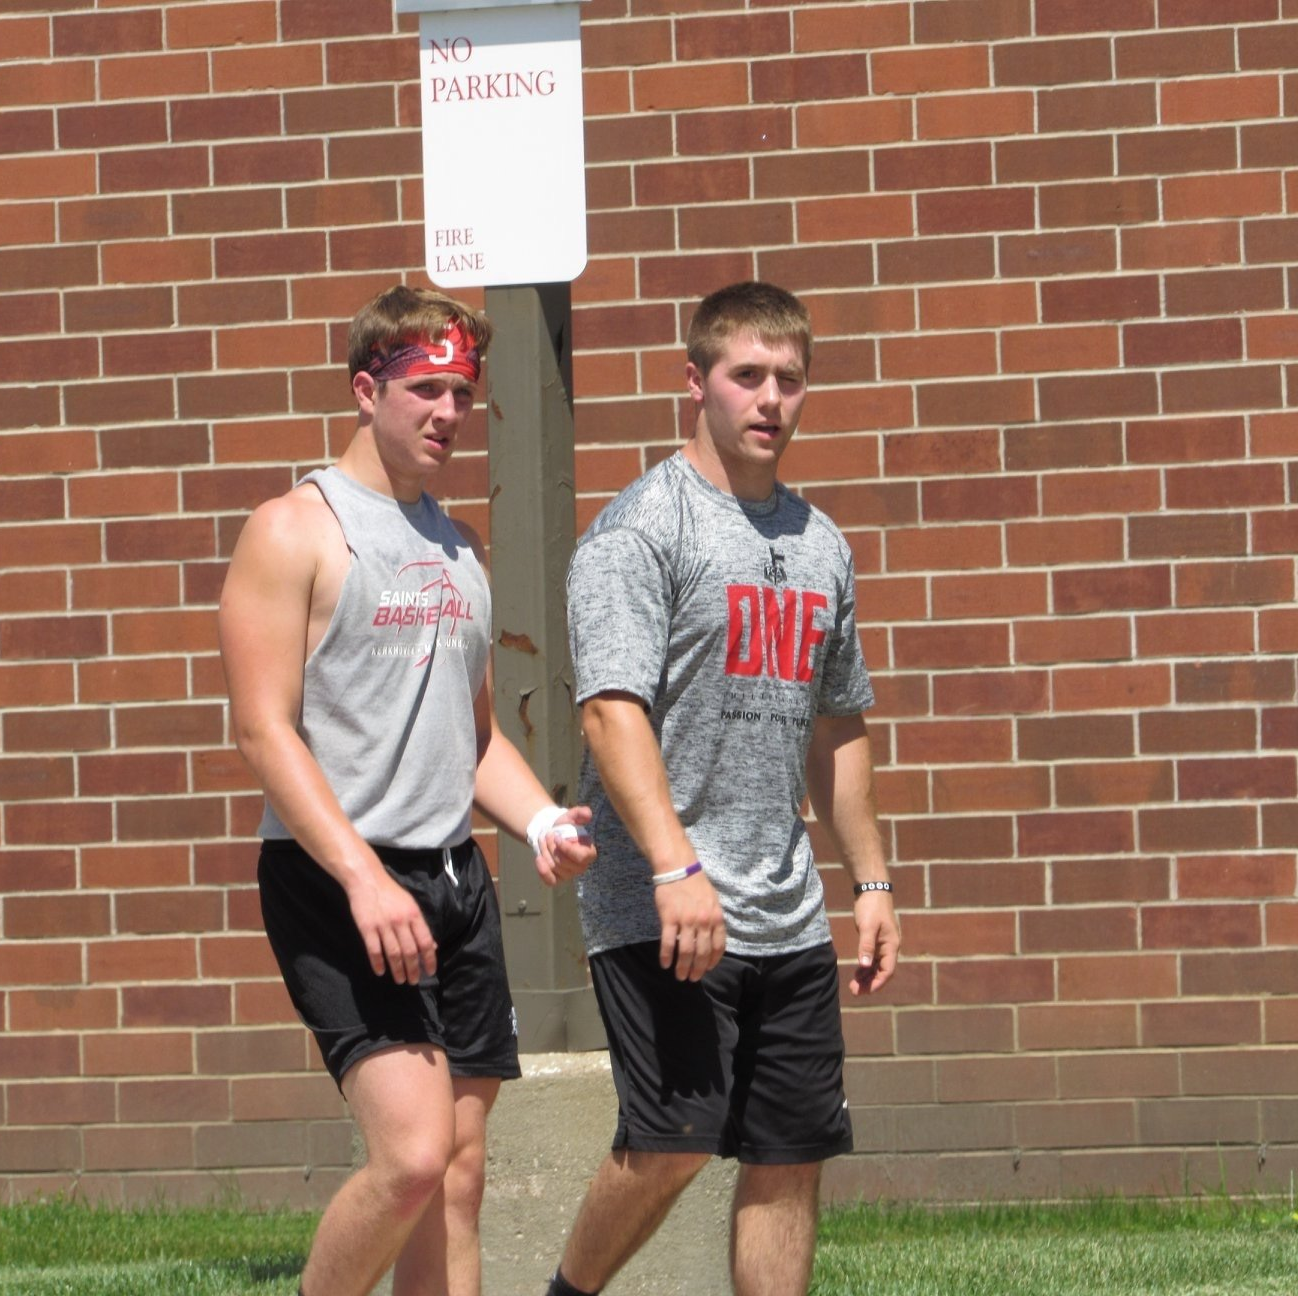 Two college-age male athletes walking outside against brick building.